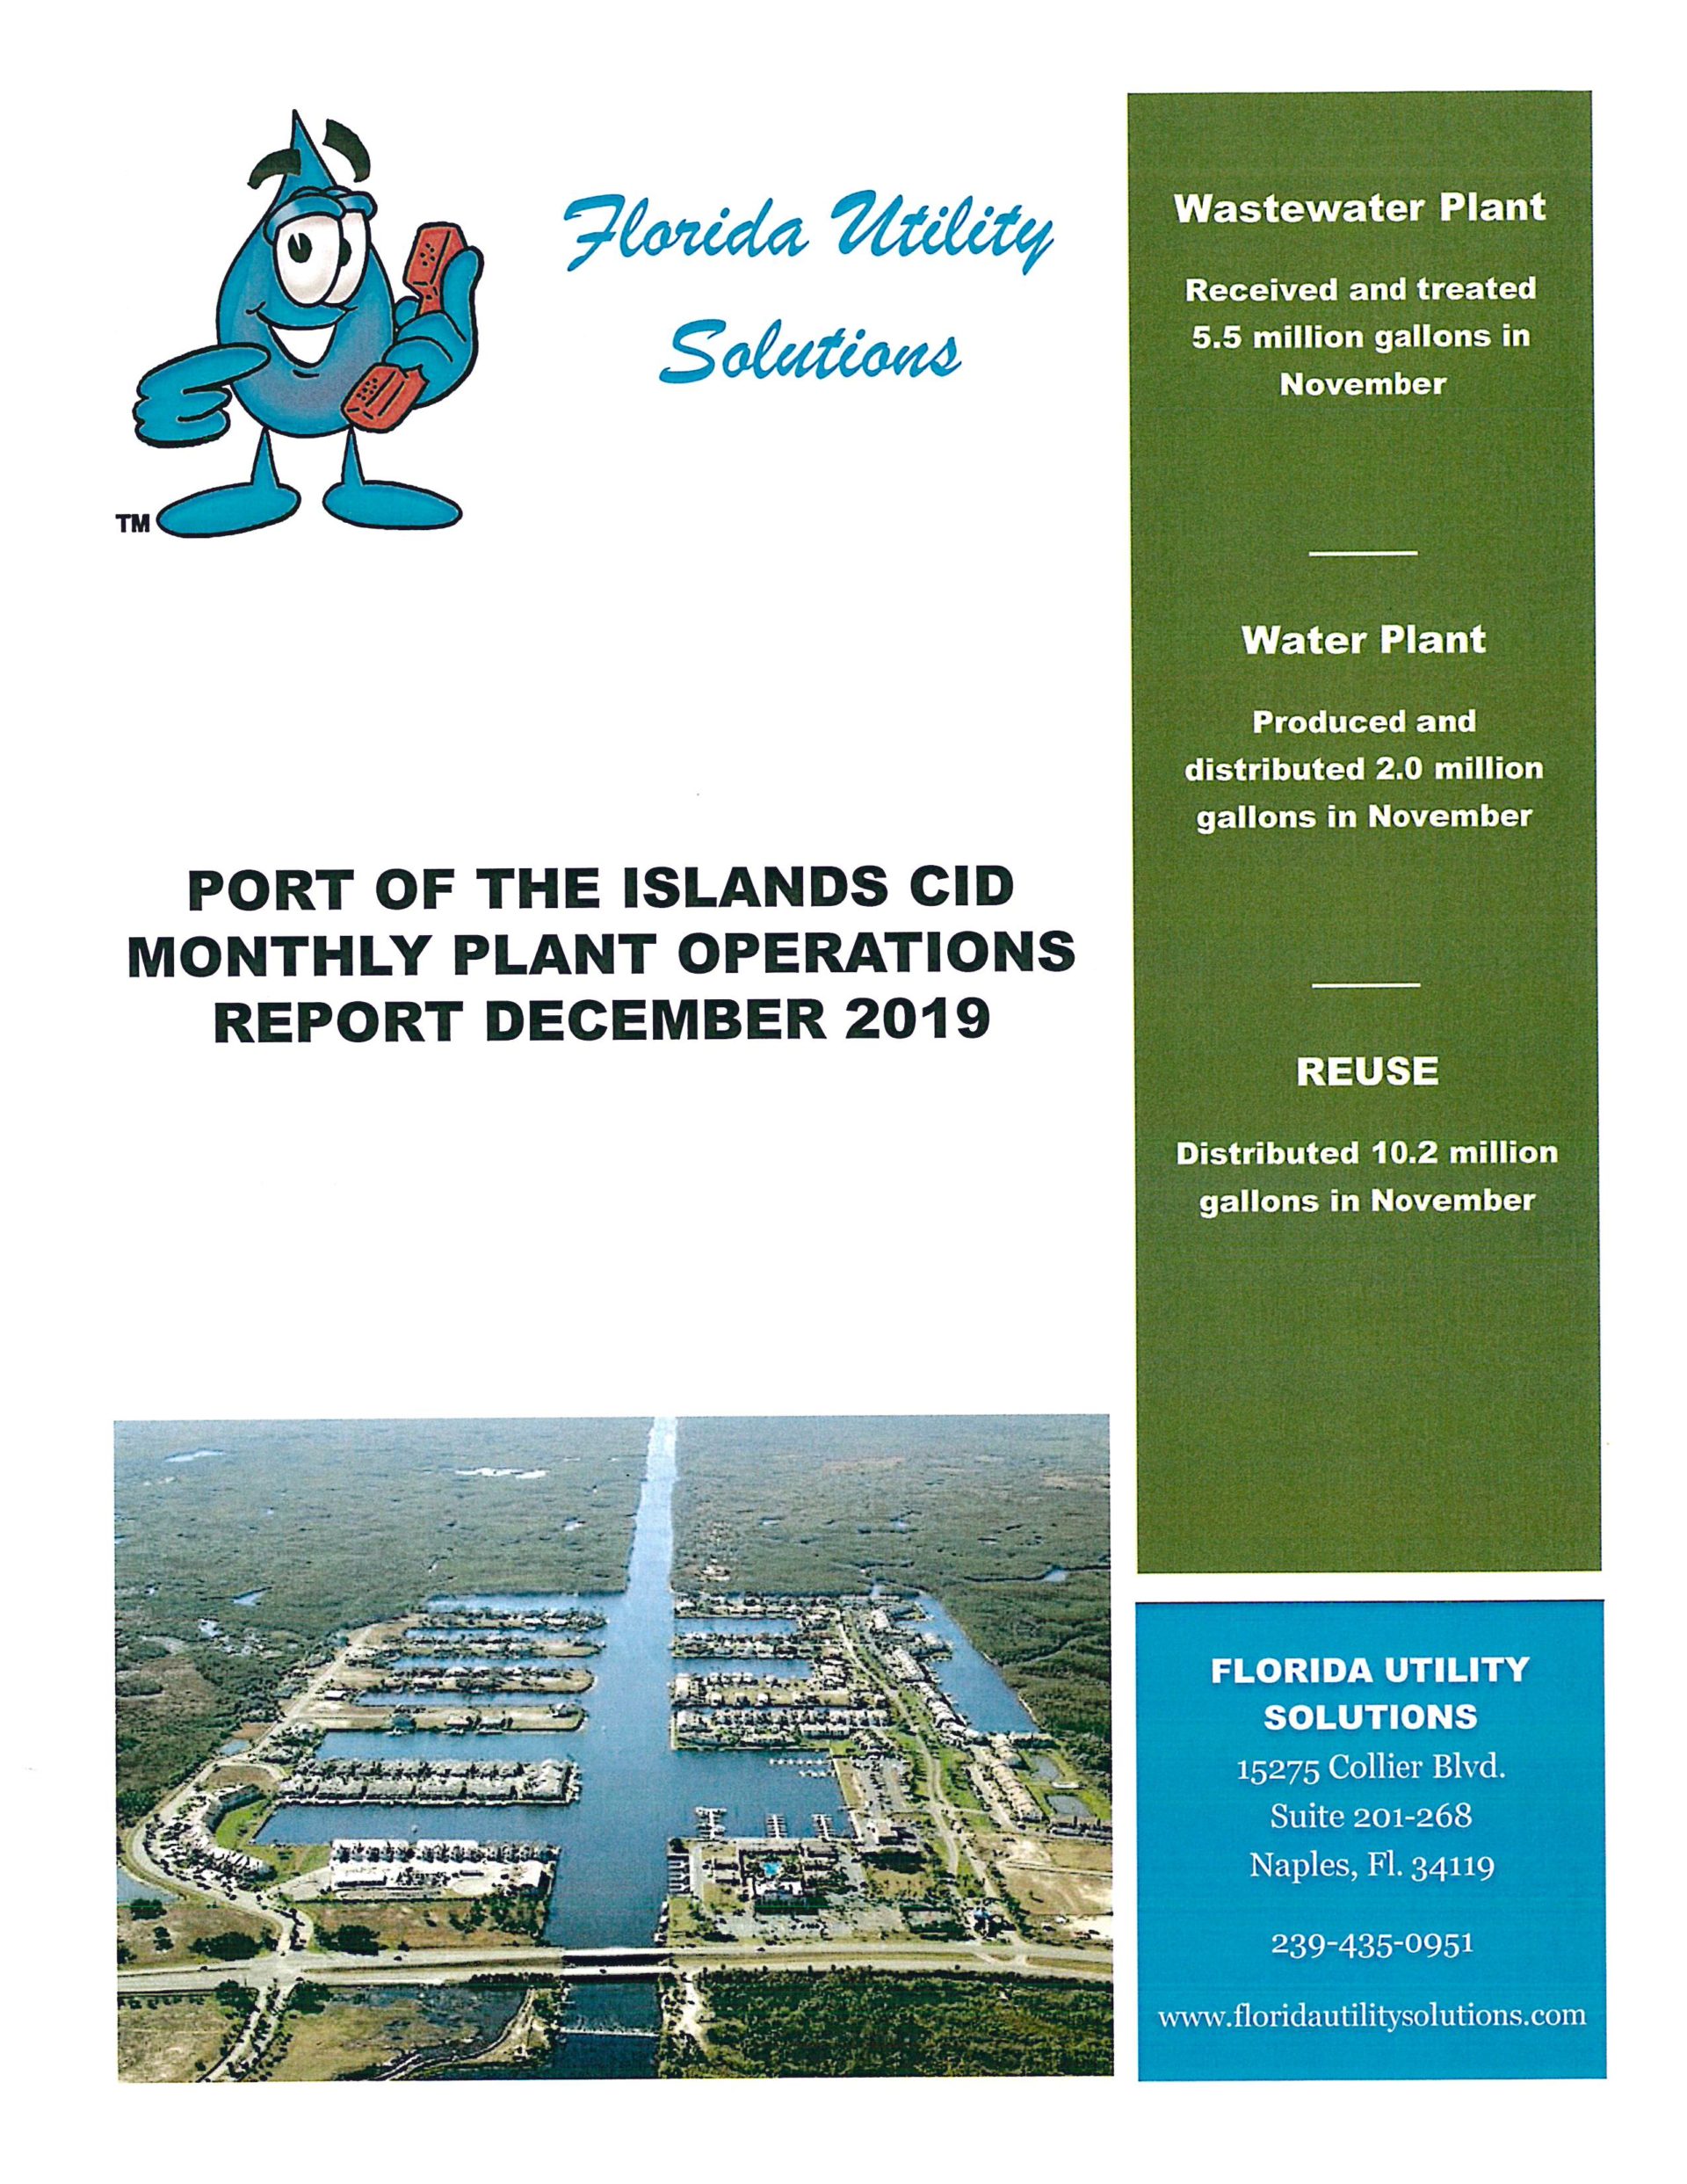 Port of the Islands Florida Utility Solutions report page 1